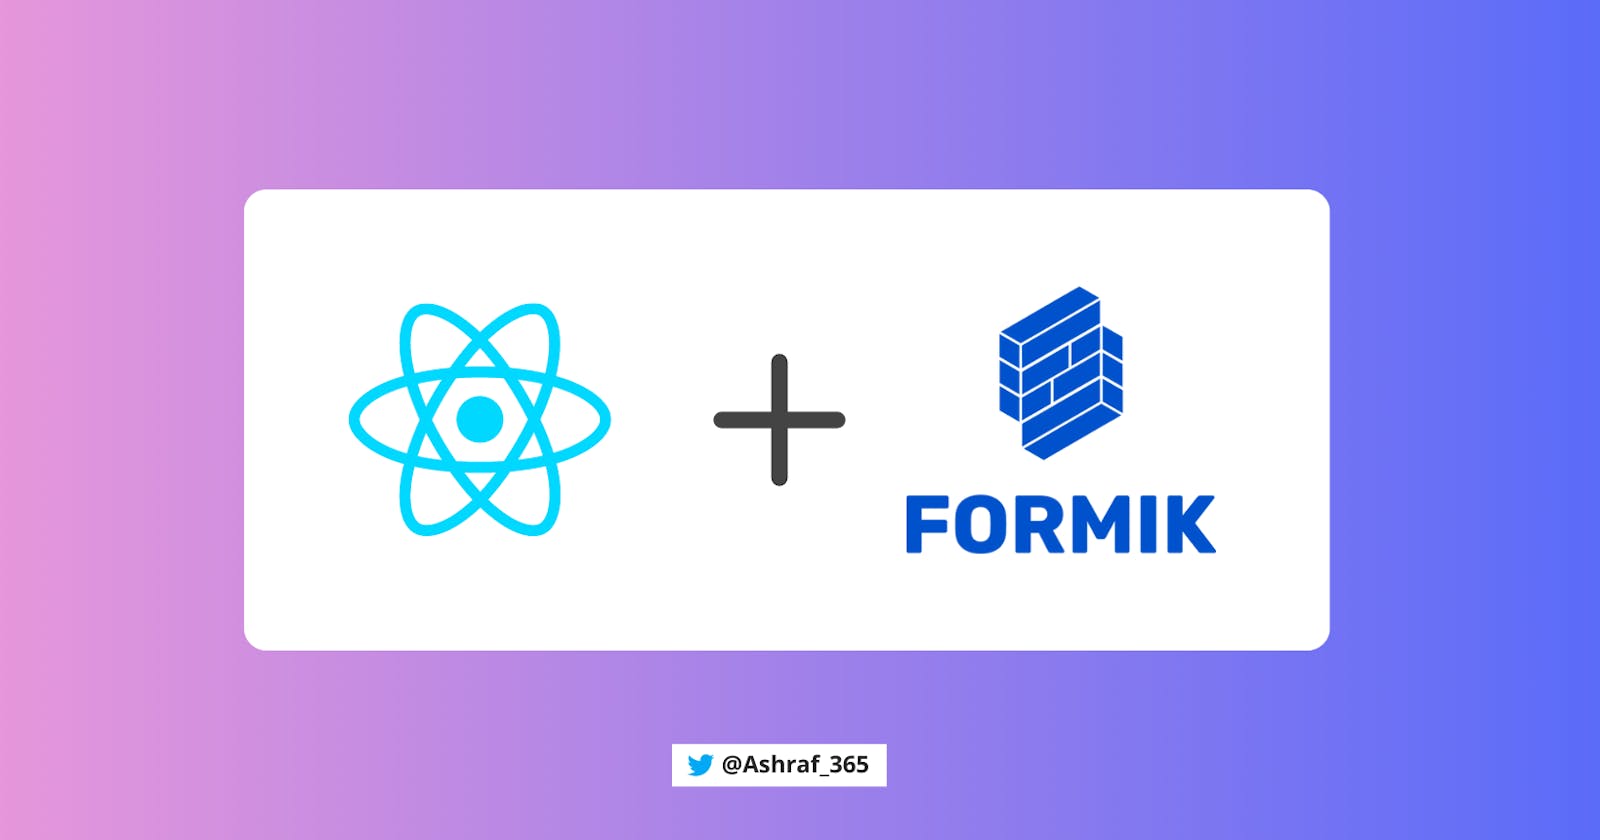 Best way to handle React forms with Formik